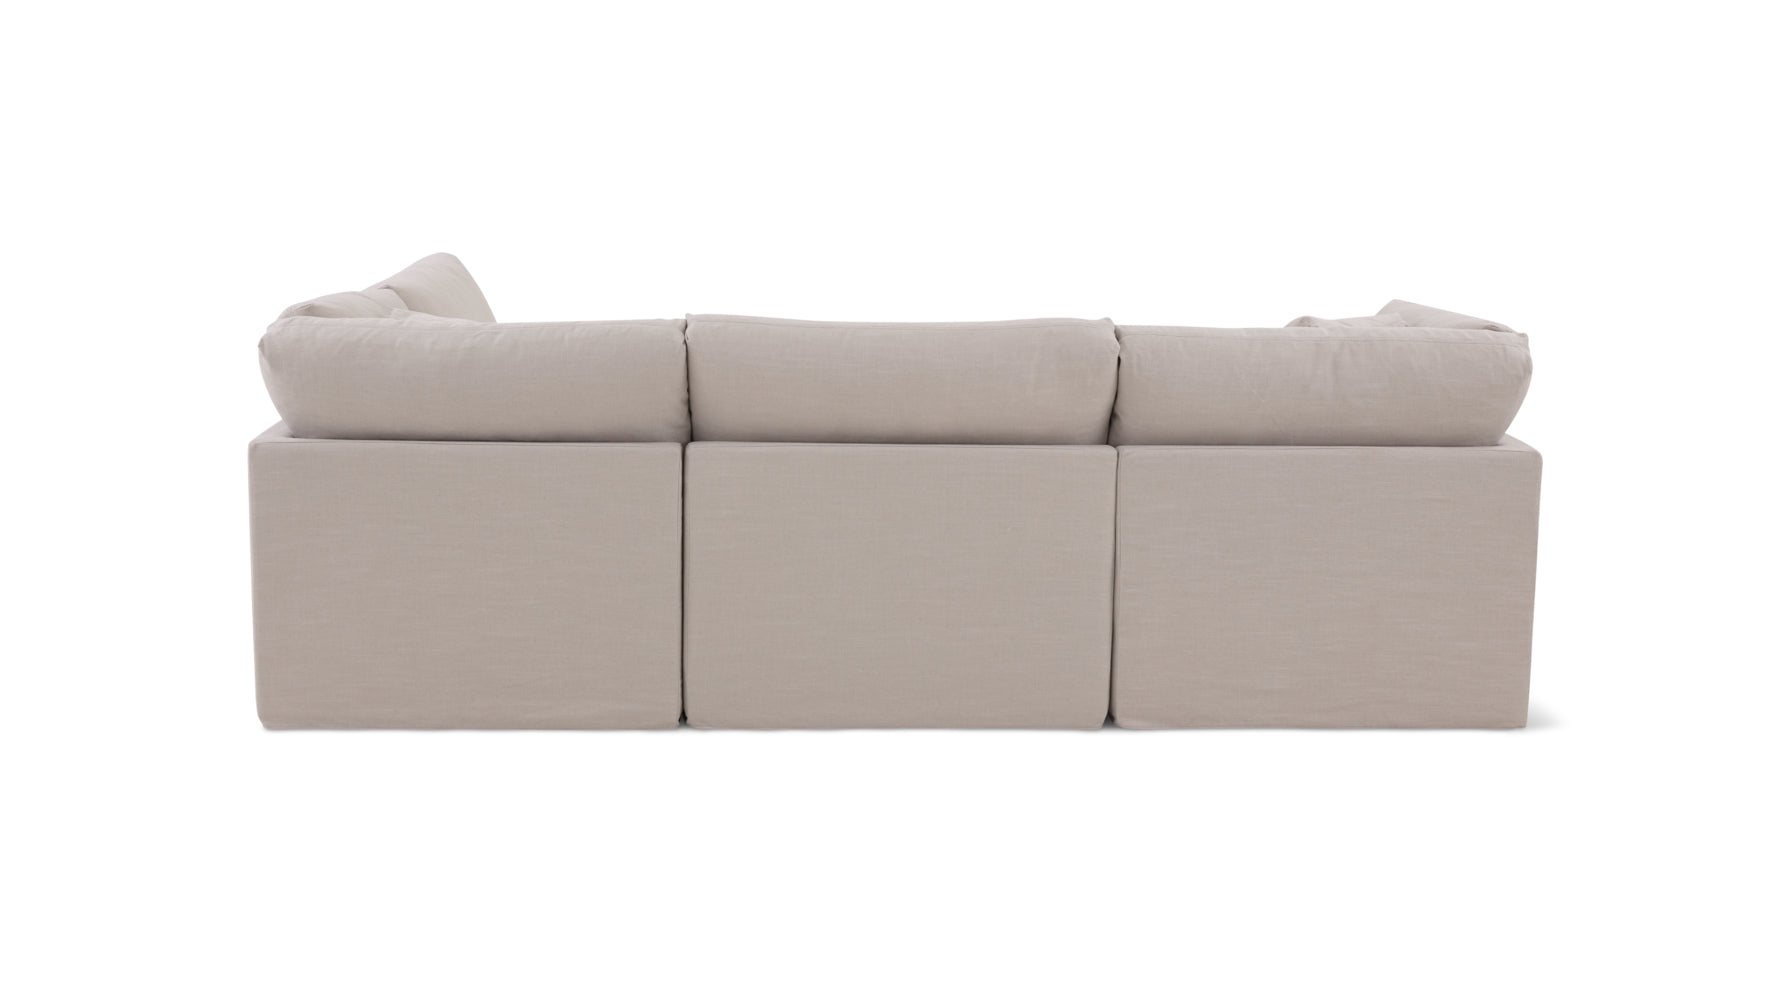 Get Together™ 5-Piece Modular Sectional, Standard, Clay - Image 7